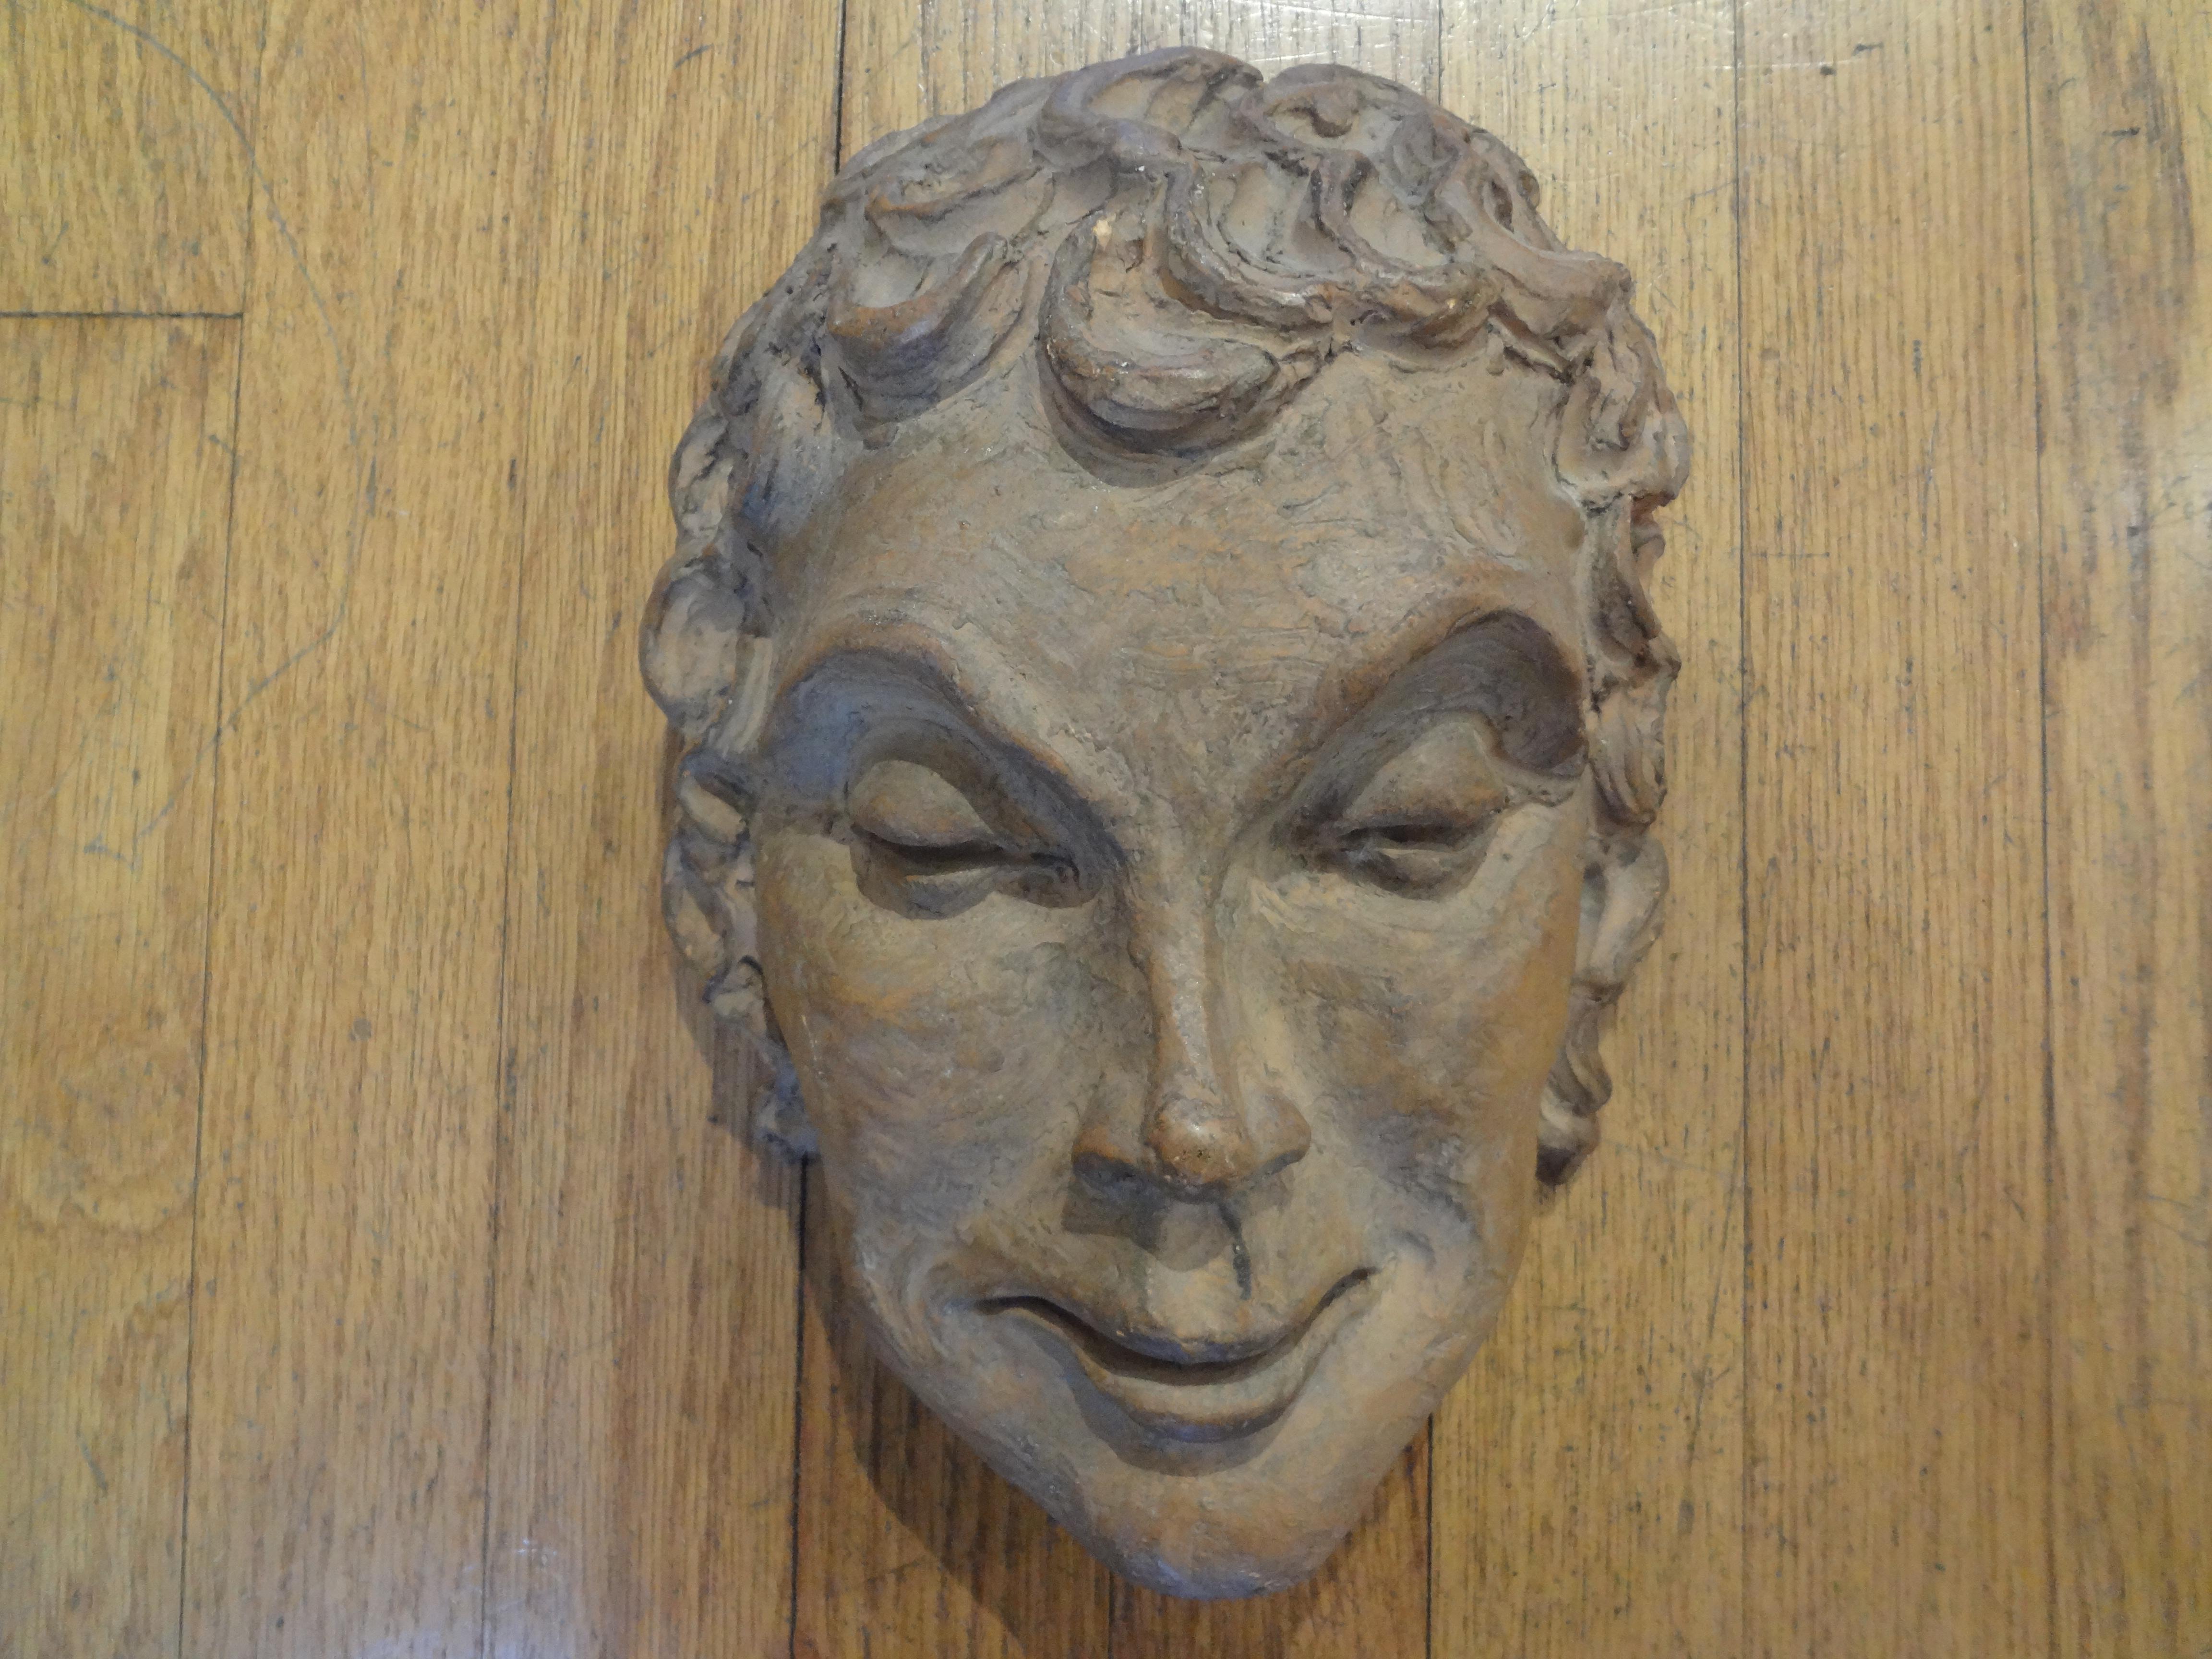 French Art Deco Terracotta Face Mask Sculpture.
Our French Art Deco terra cotta sculpture can be displayed on a wall mounted or placed on a flat surface.
Great Art Deco Accessory!